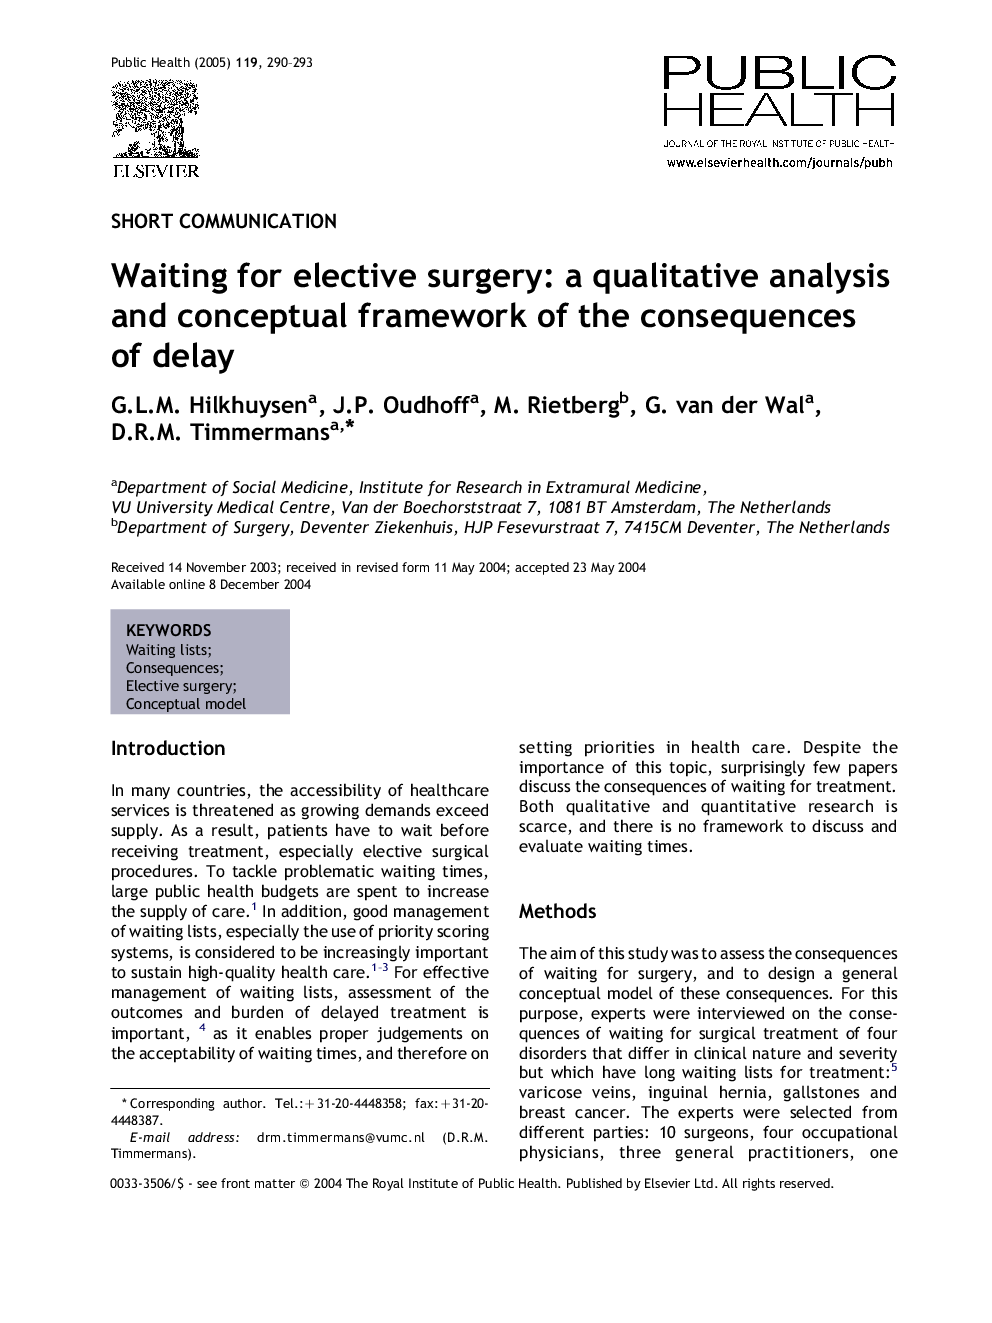 Waiting for elective surgery: a qualitative analysis and conceptual framework of the consequences of delay